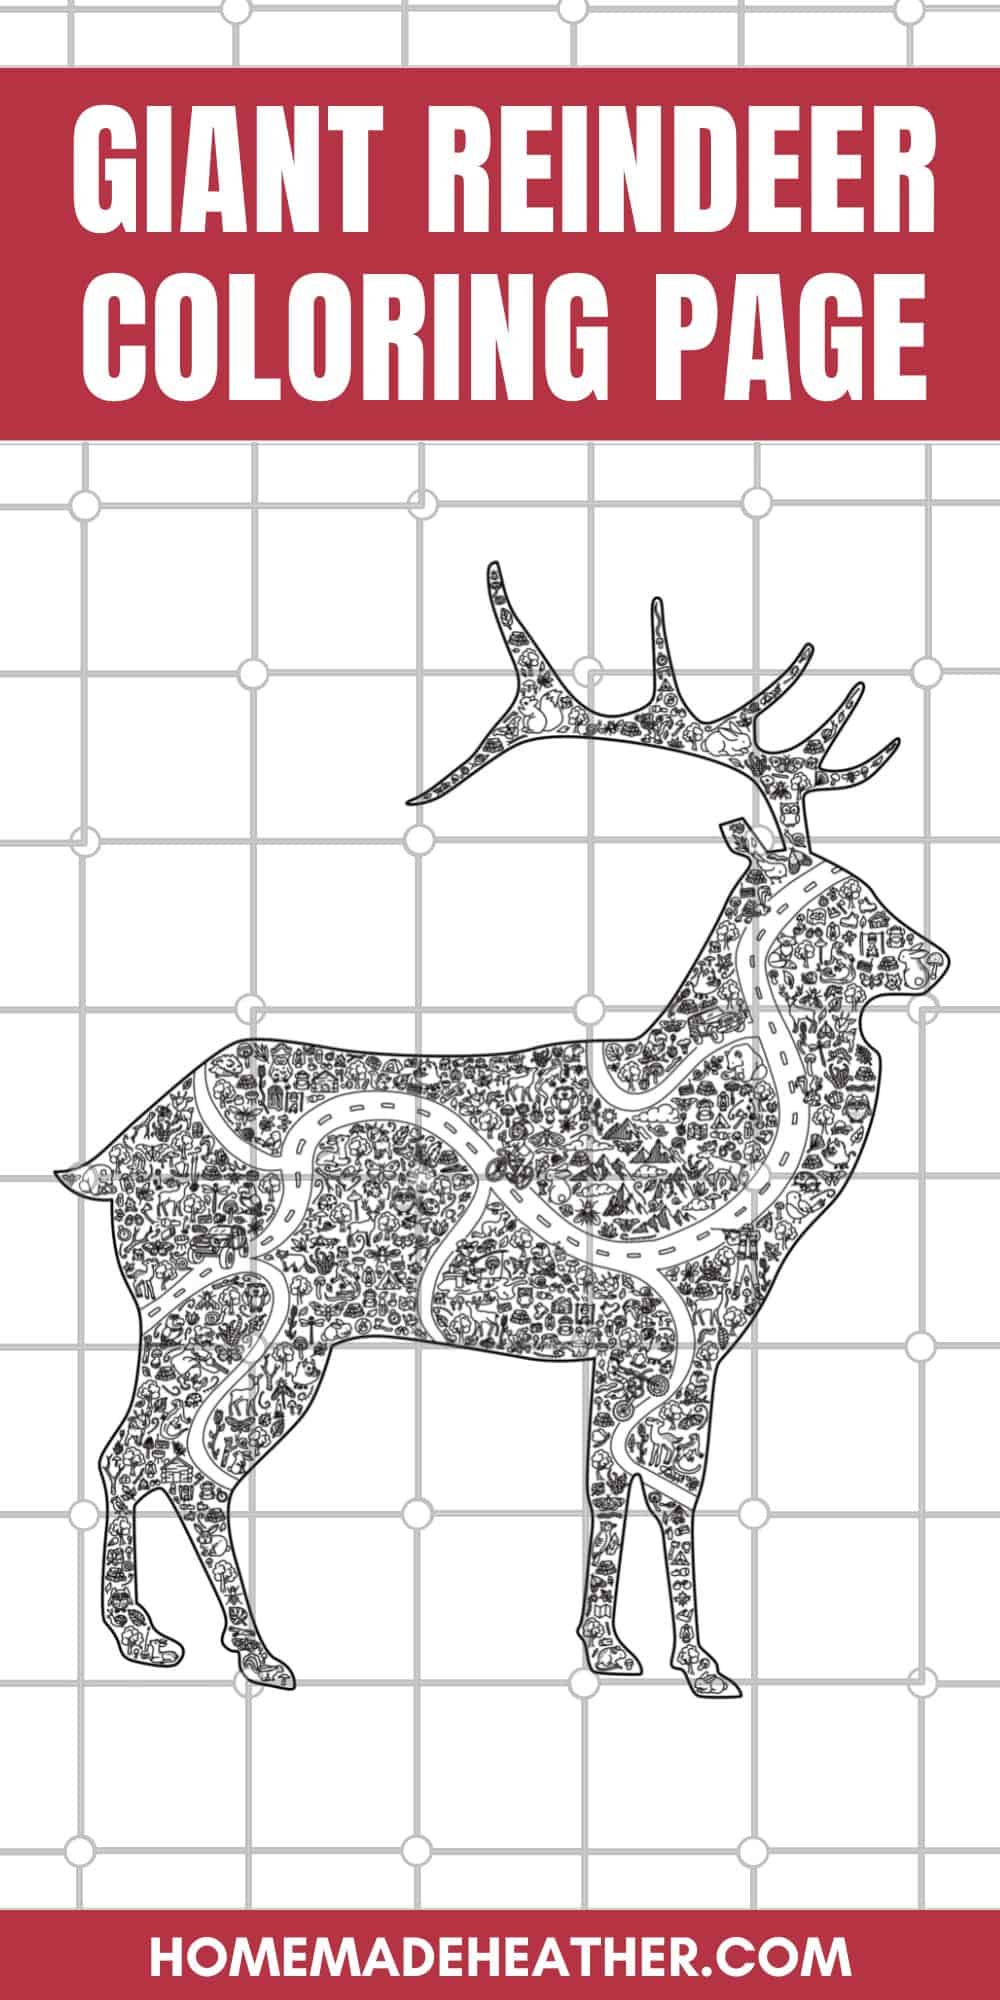 Giant reindeer coloring page printable homemade heather